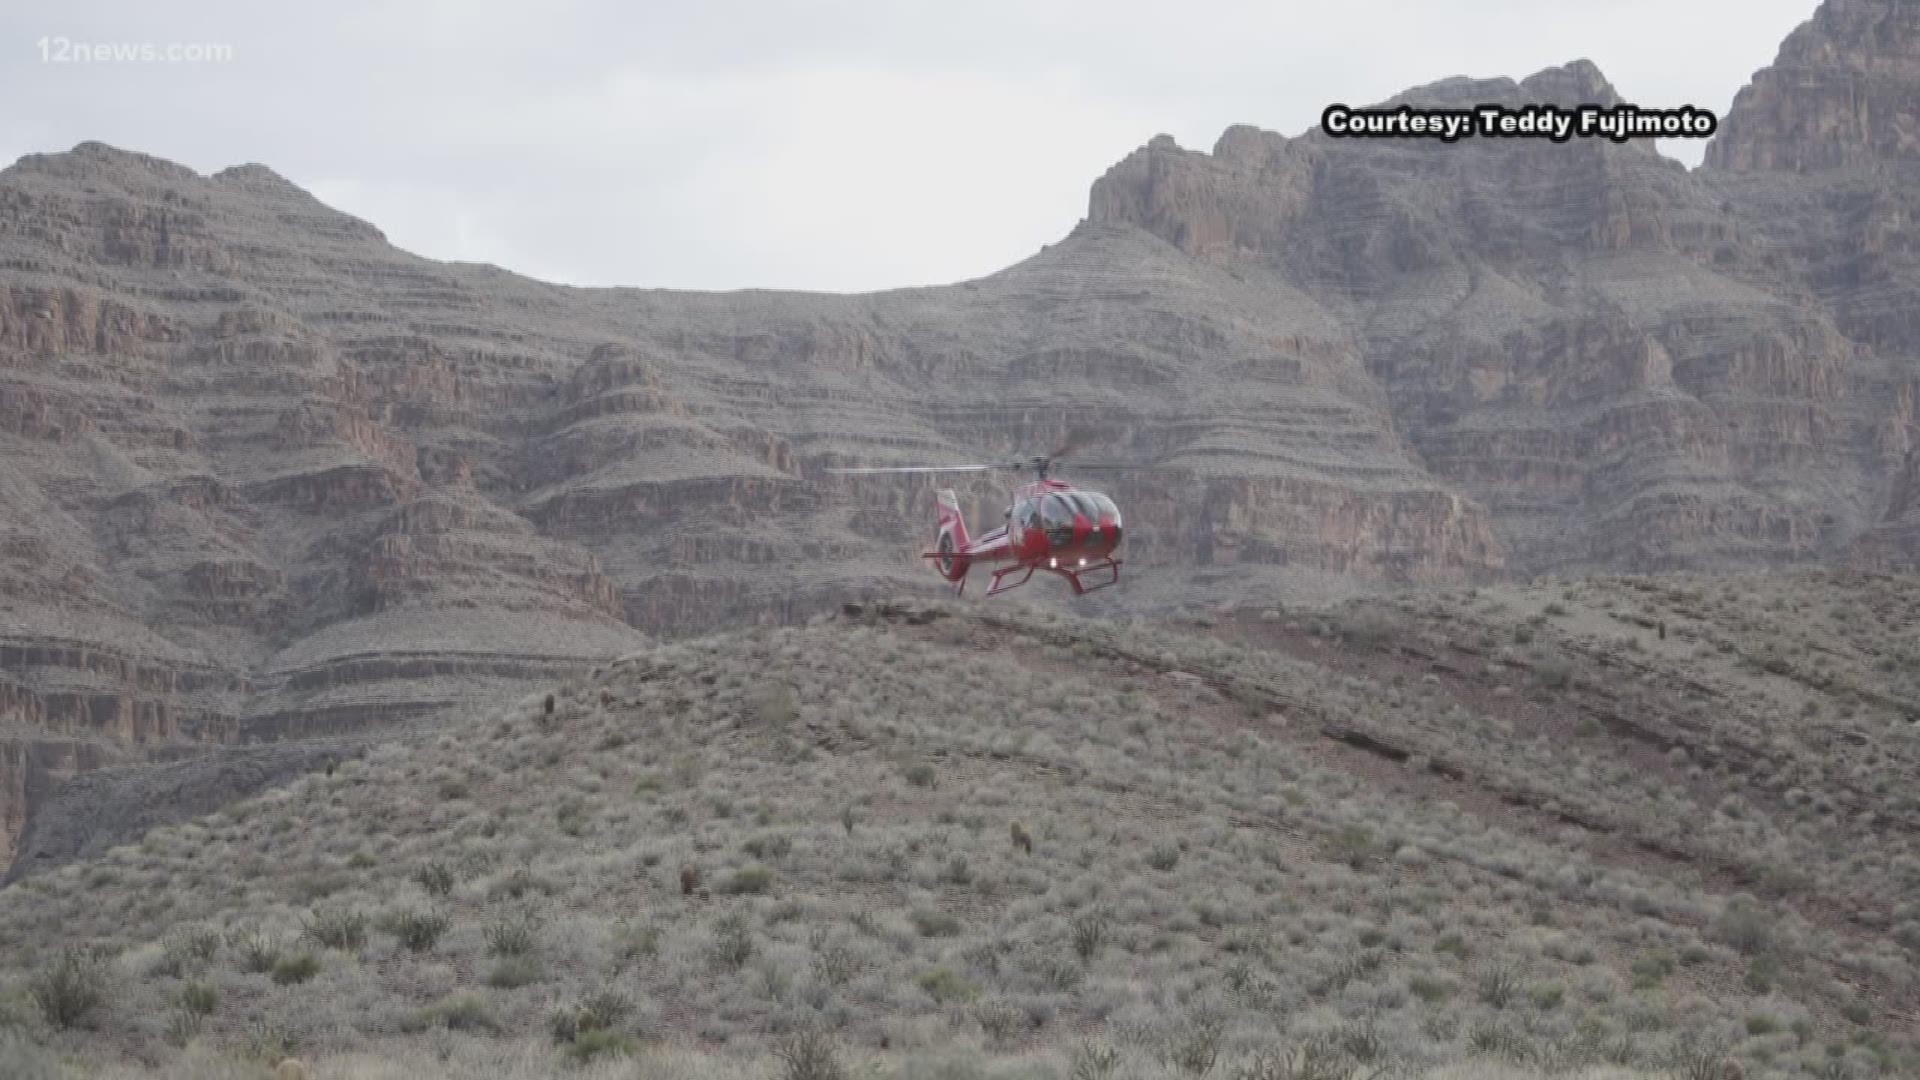 The victims who died when a tour helicopter crashed in the Grand Canyon Sunday have been identified as 27-year-old Becky Dobson, 27; her boyfriend, 30-year-old Stuart Hill; and his brother, 32-year-old Jason Hill. Charly Edsitty has the details.